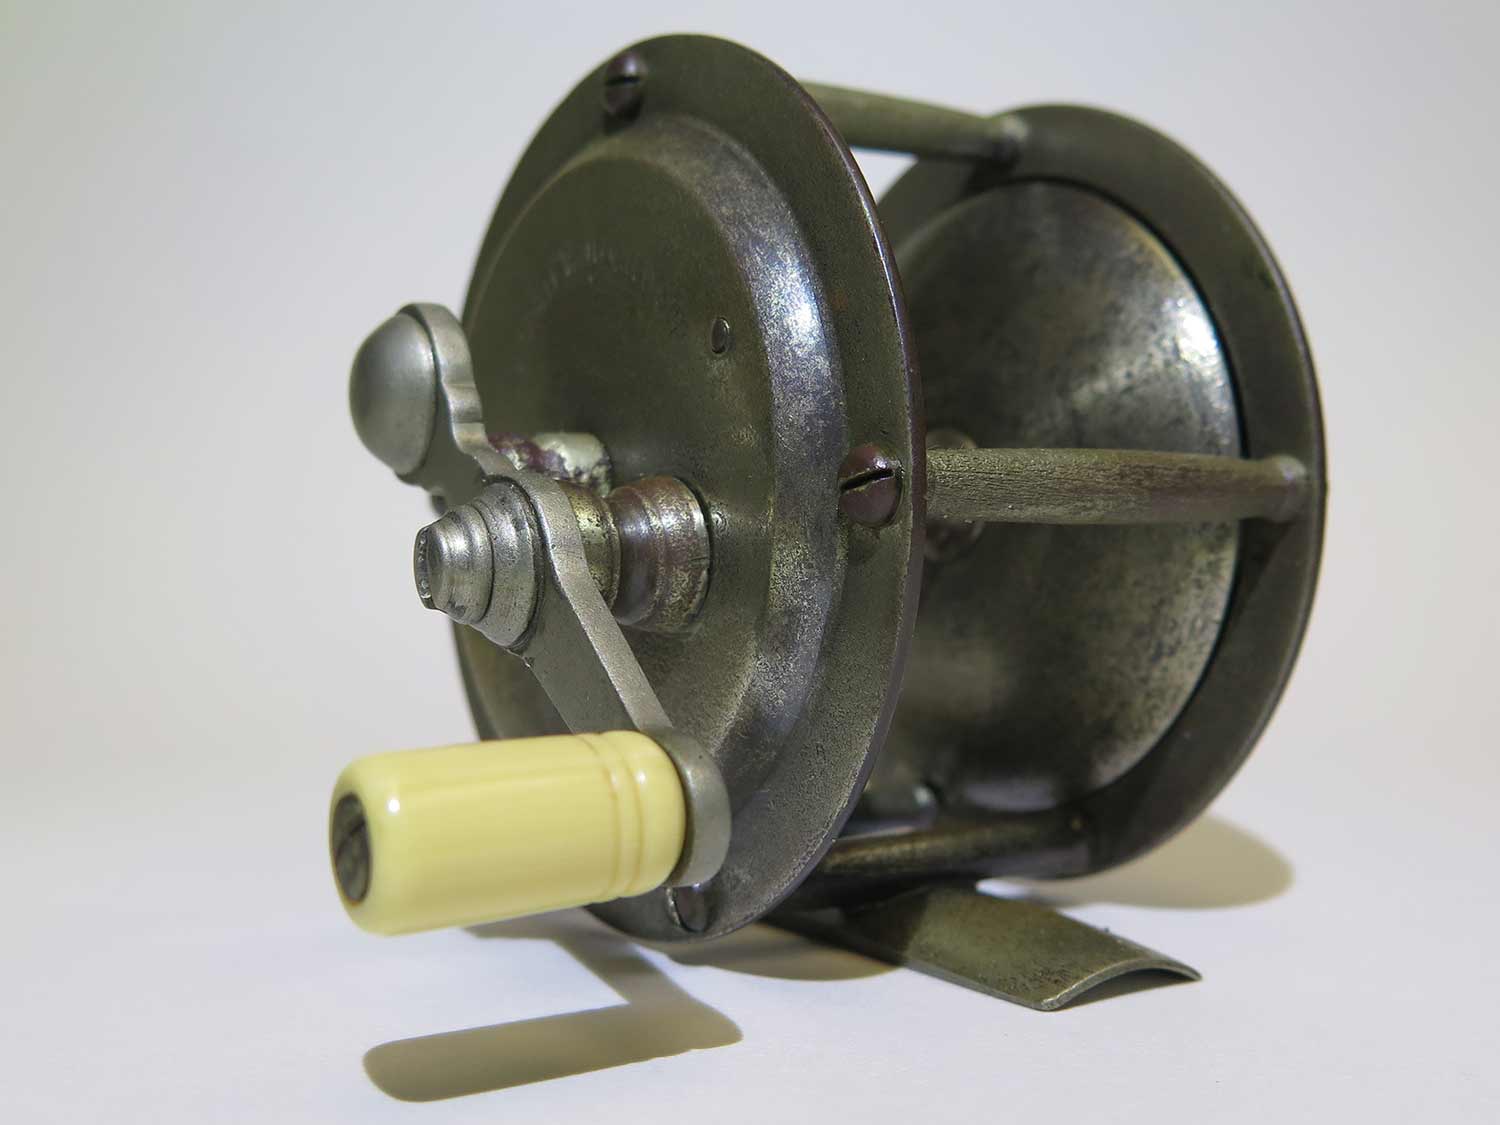 All Freshwater Vintage Fishing Reels for sale